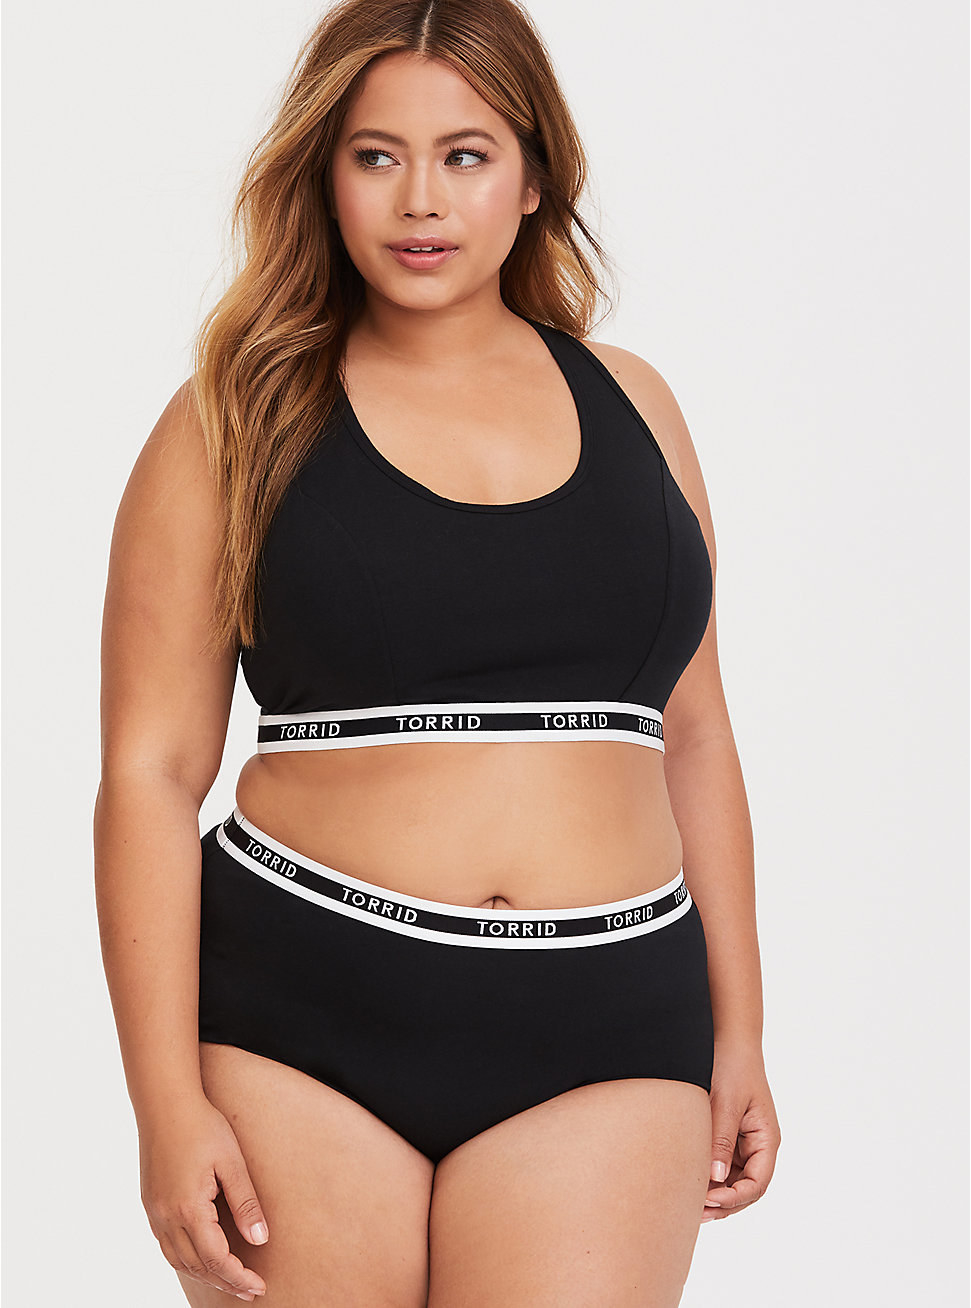 model wearing the black cotton briefs with Torrid logo waistband